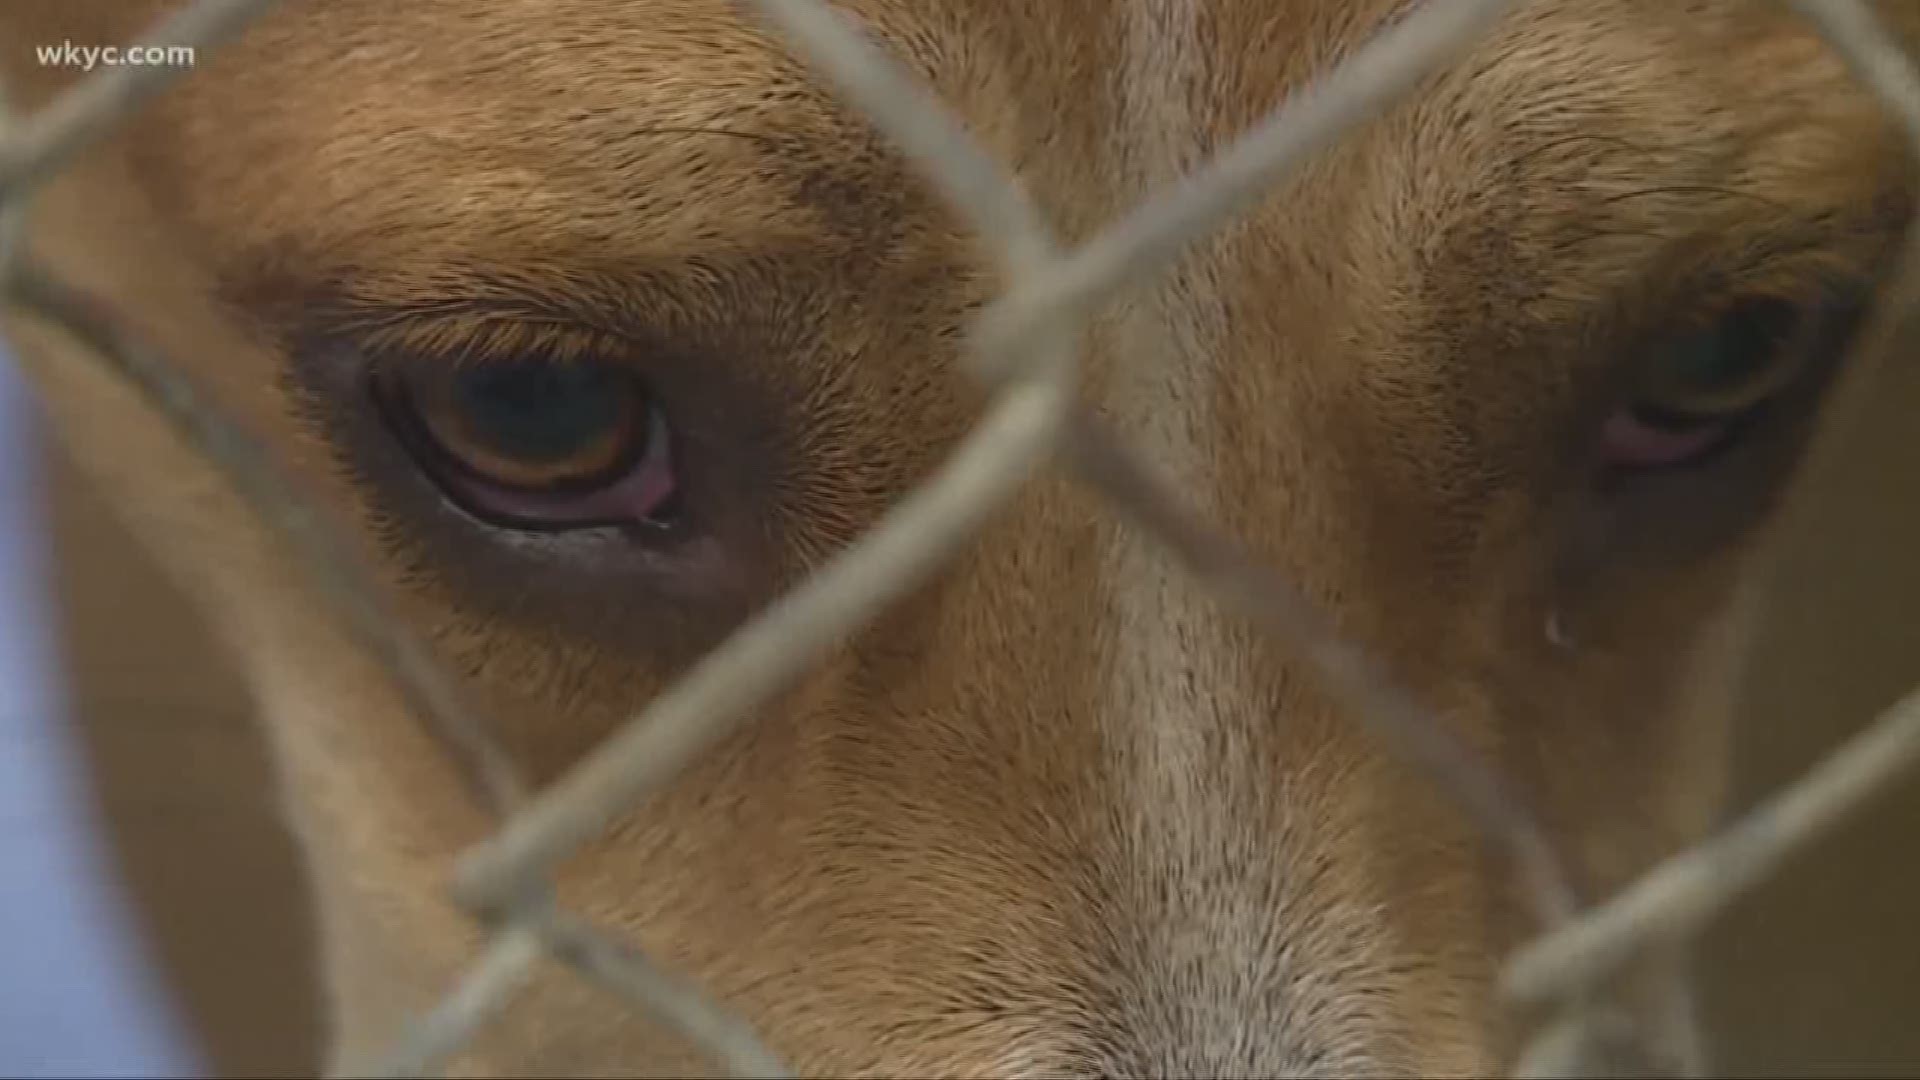 Out of room at Lorain County dog kennel